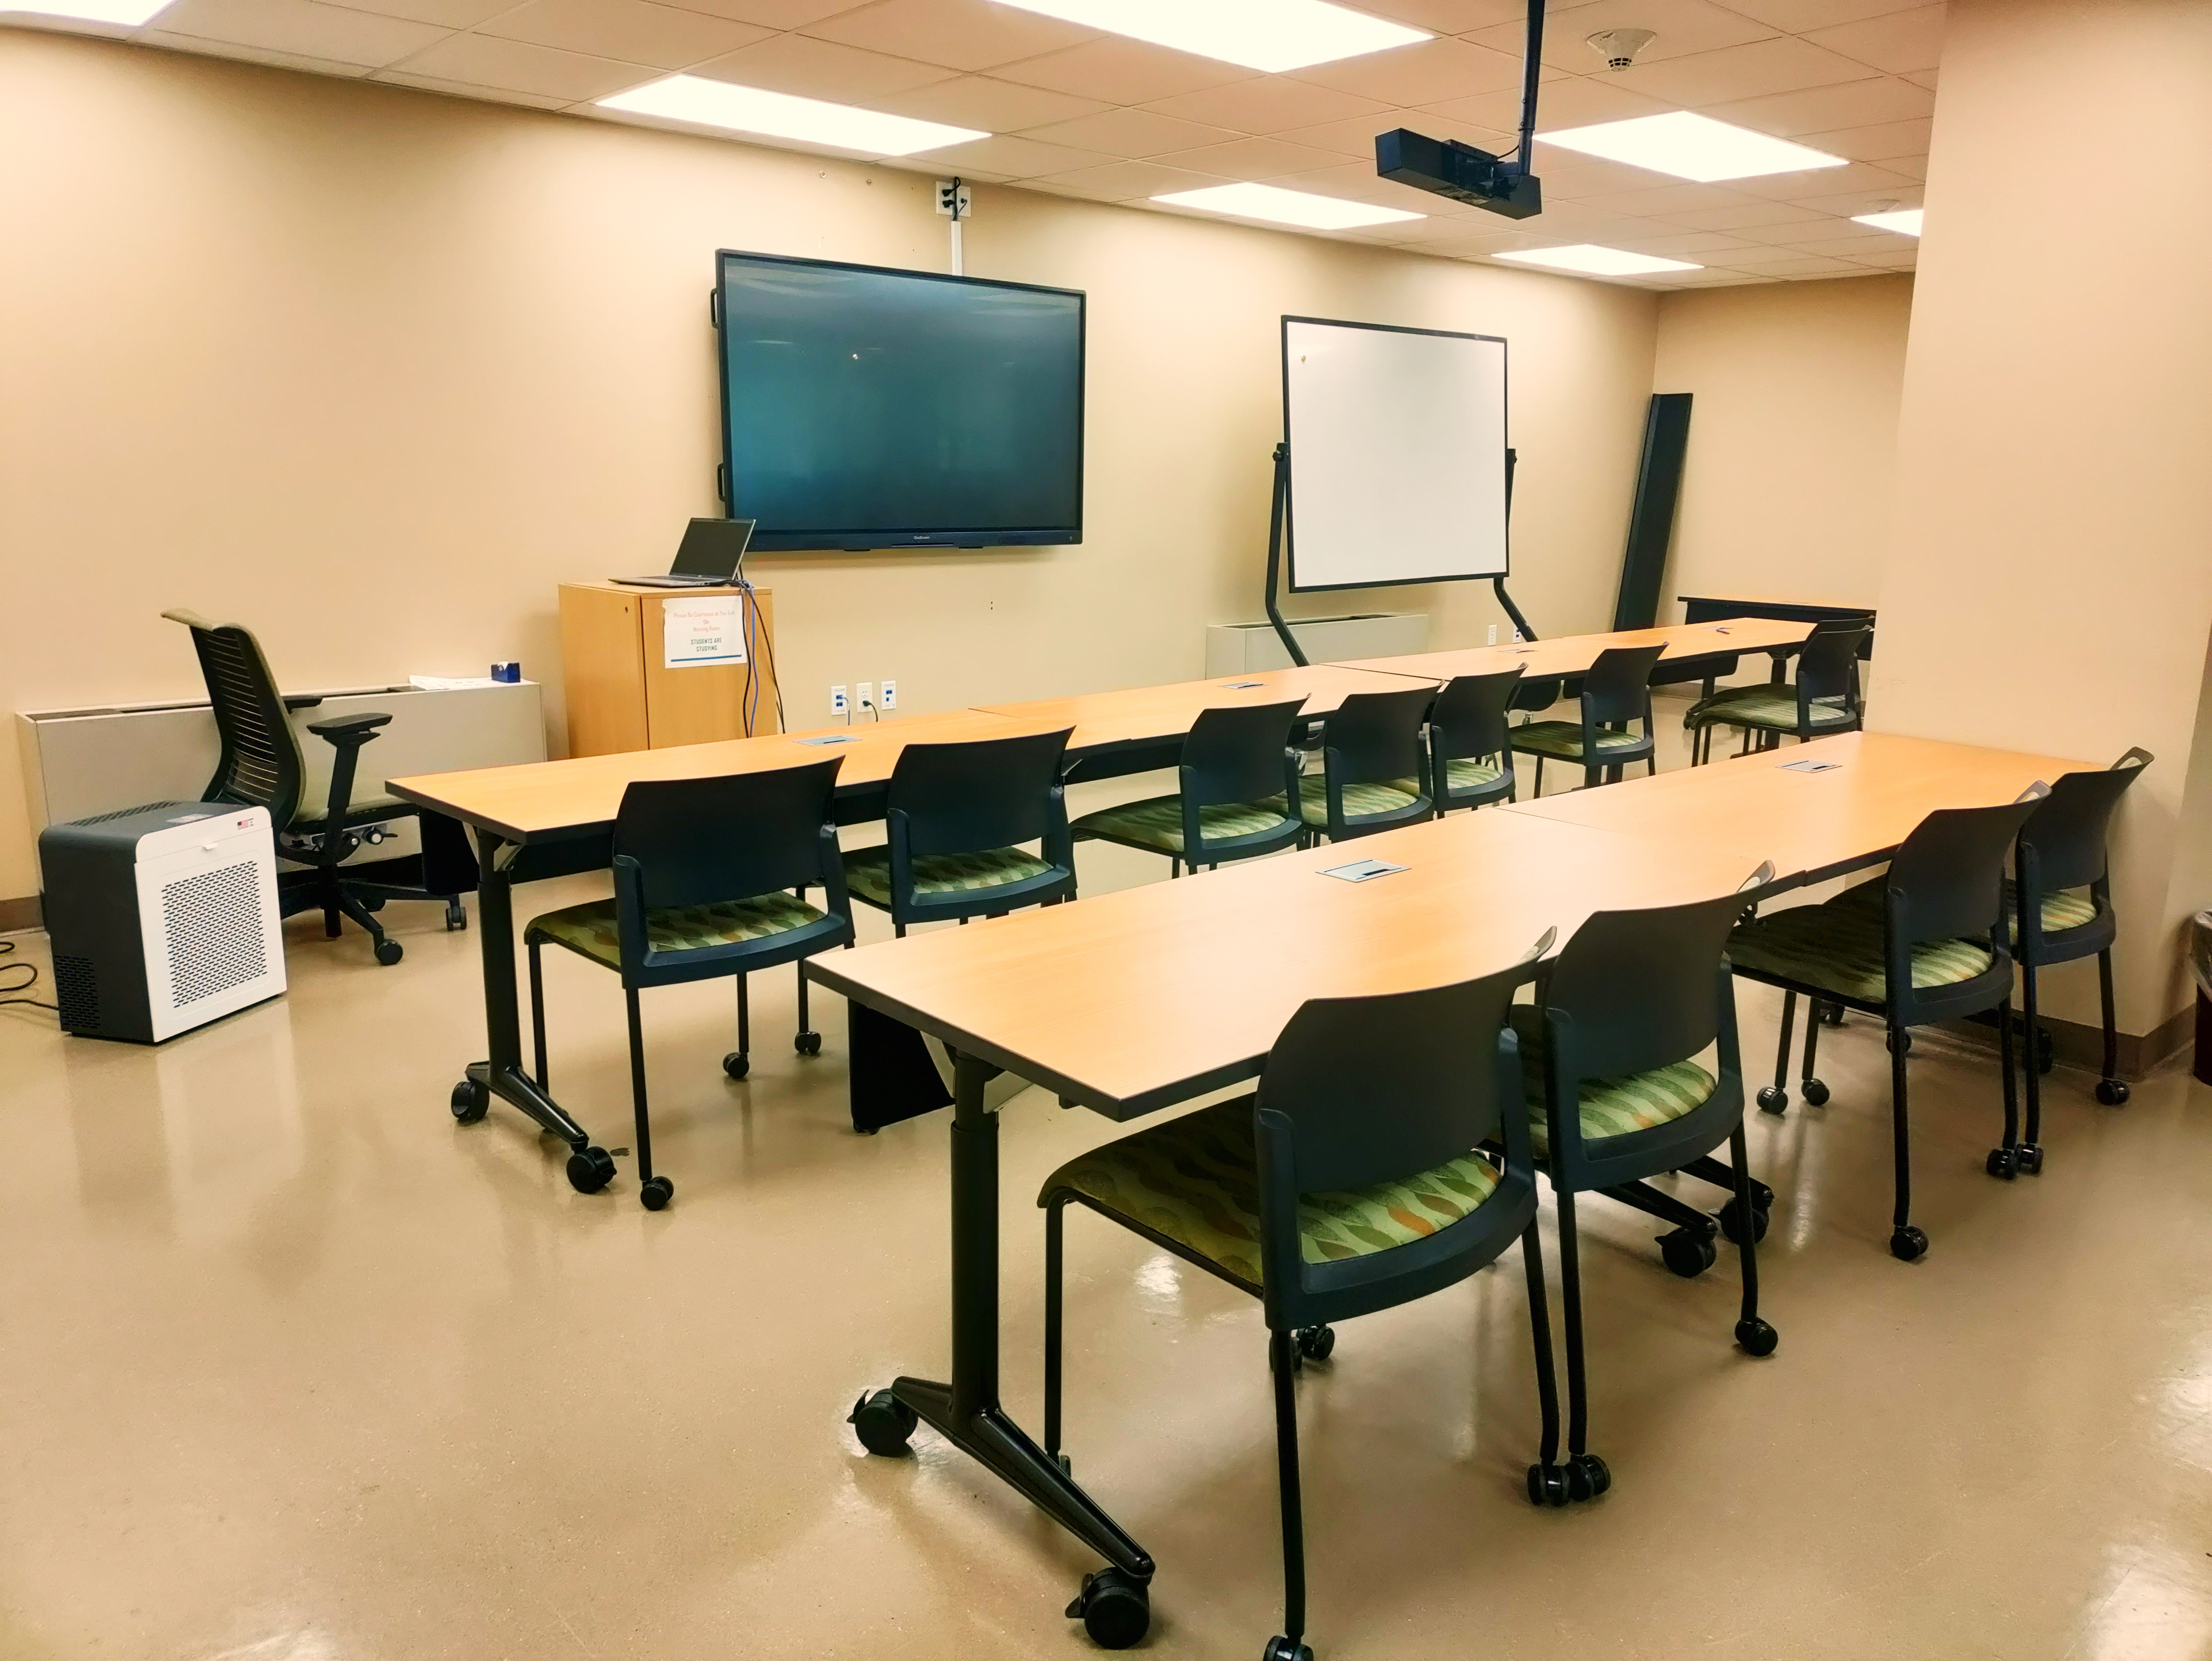 Multipurpose Room 104, the library's downstairs classroom. Chairs and tables face a projector screen and rolling whiteboard.